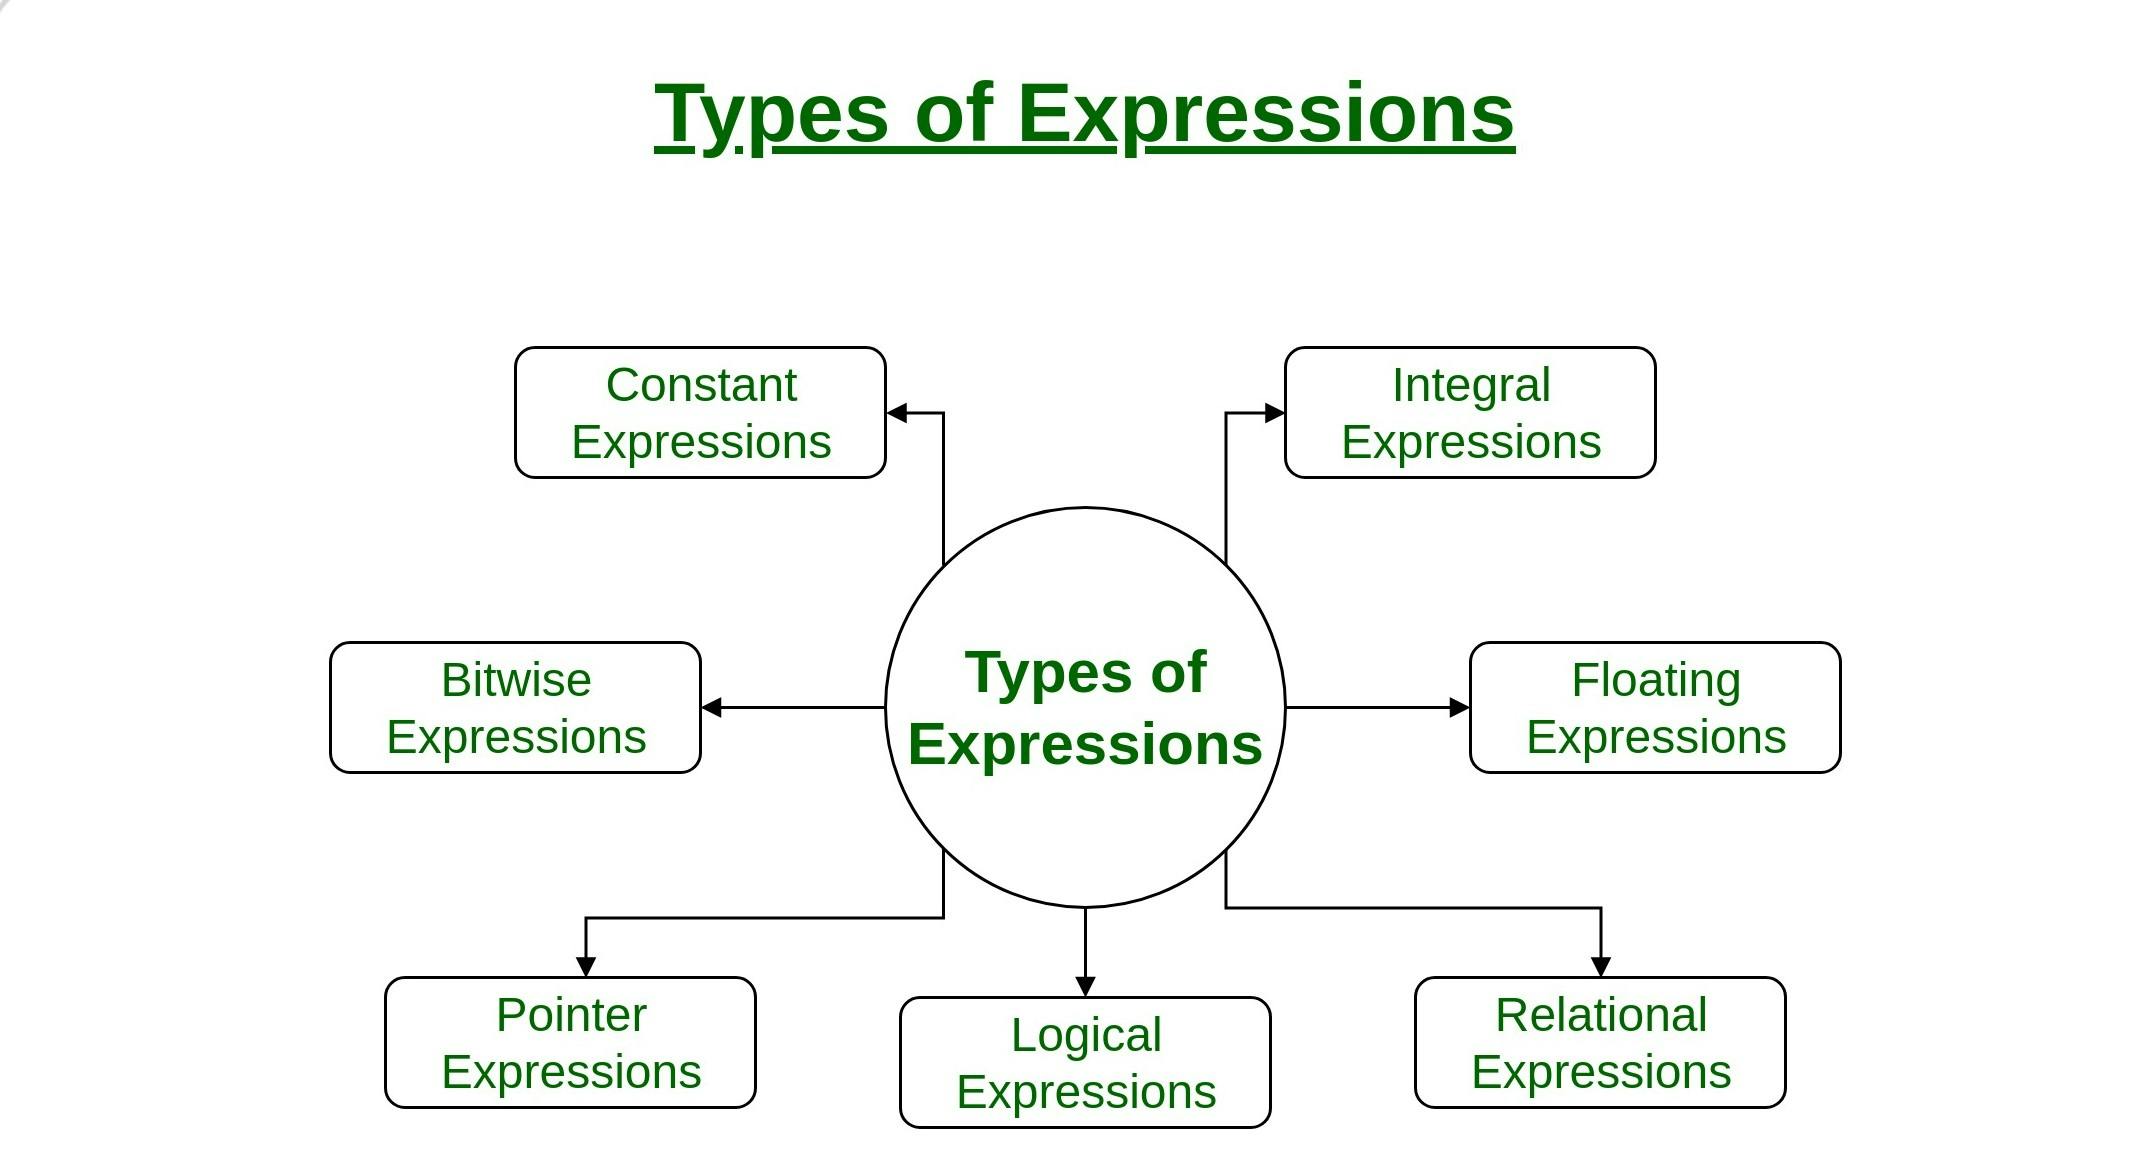 Types-of-Expressions.jpg